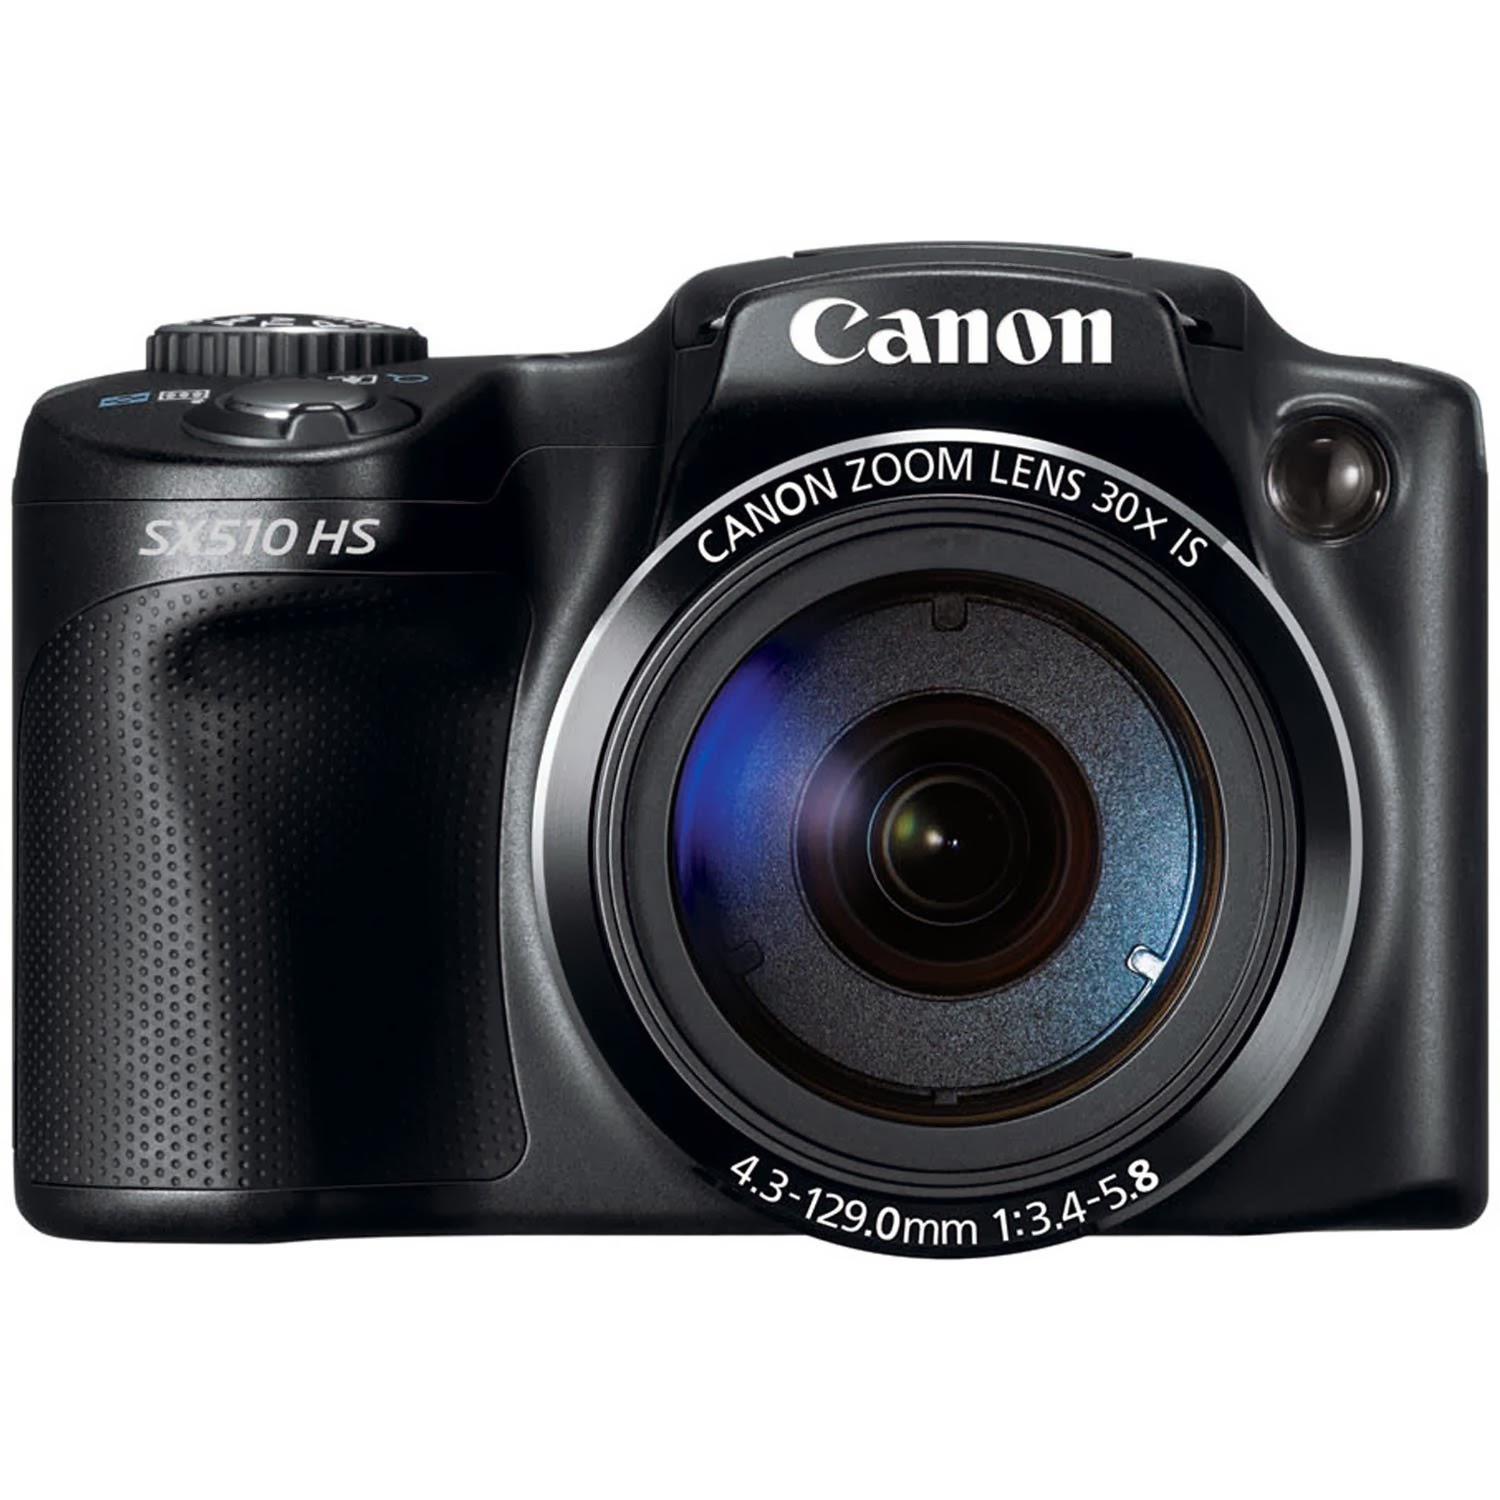 Canon+PowerShot+SX510+HS+12.1+MP+CMOS+Digital+Camera+with+30x+Optical+Zoom+and+1080p+Full-HD+Video.jpg